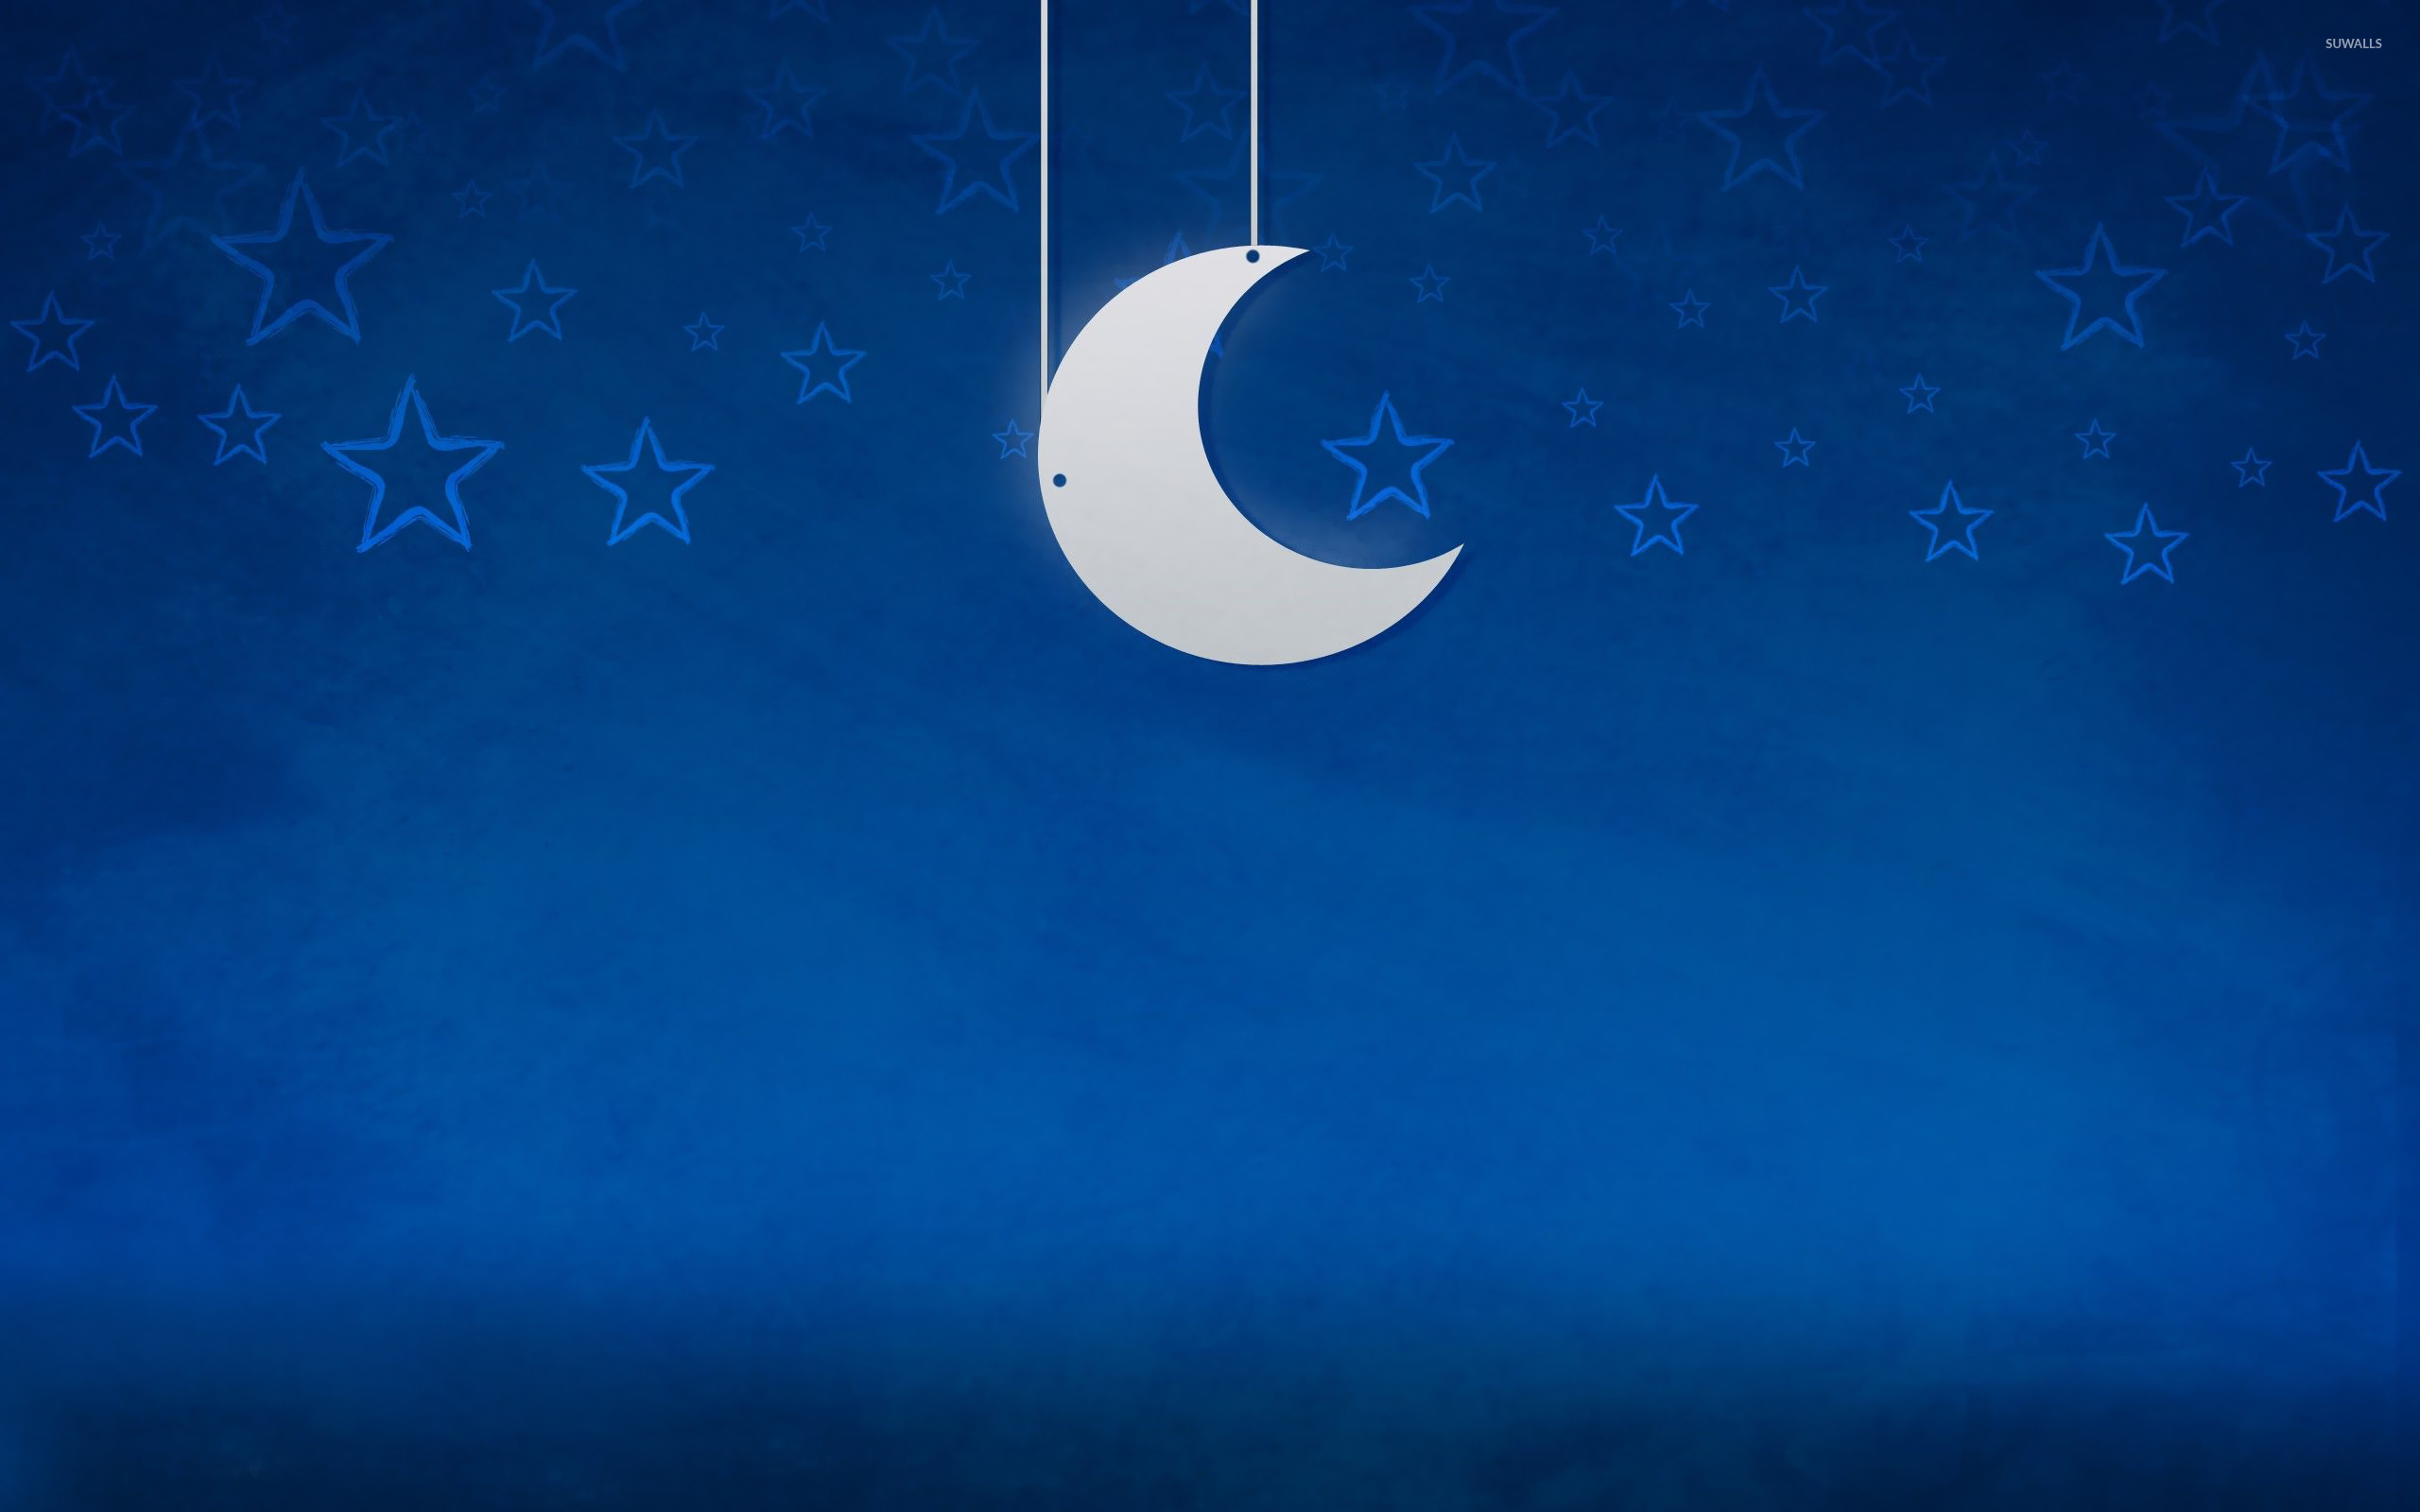 Moon And Star PNG HD - 147868